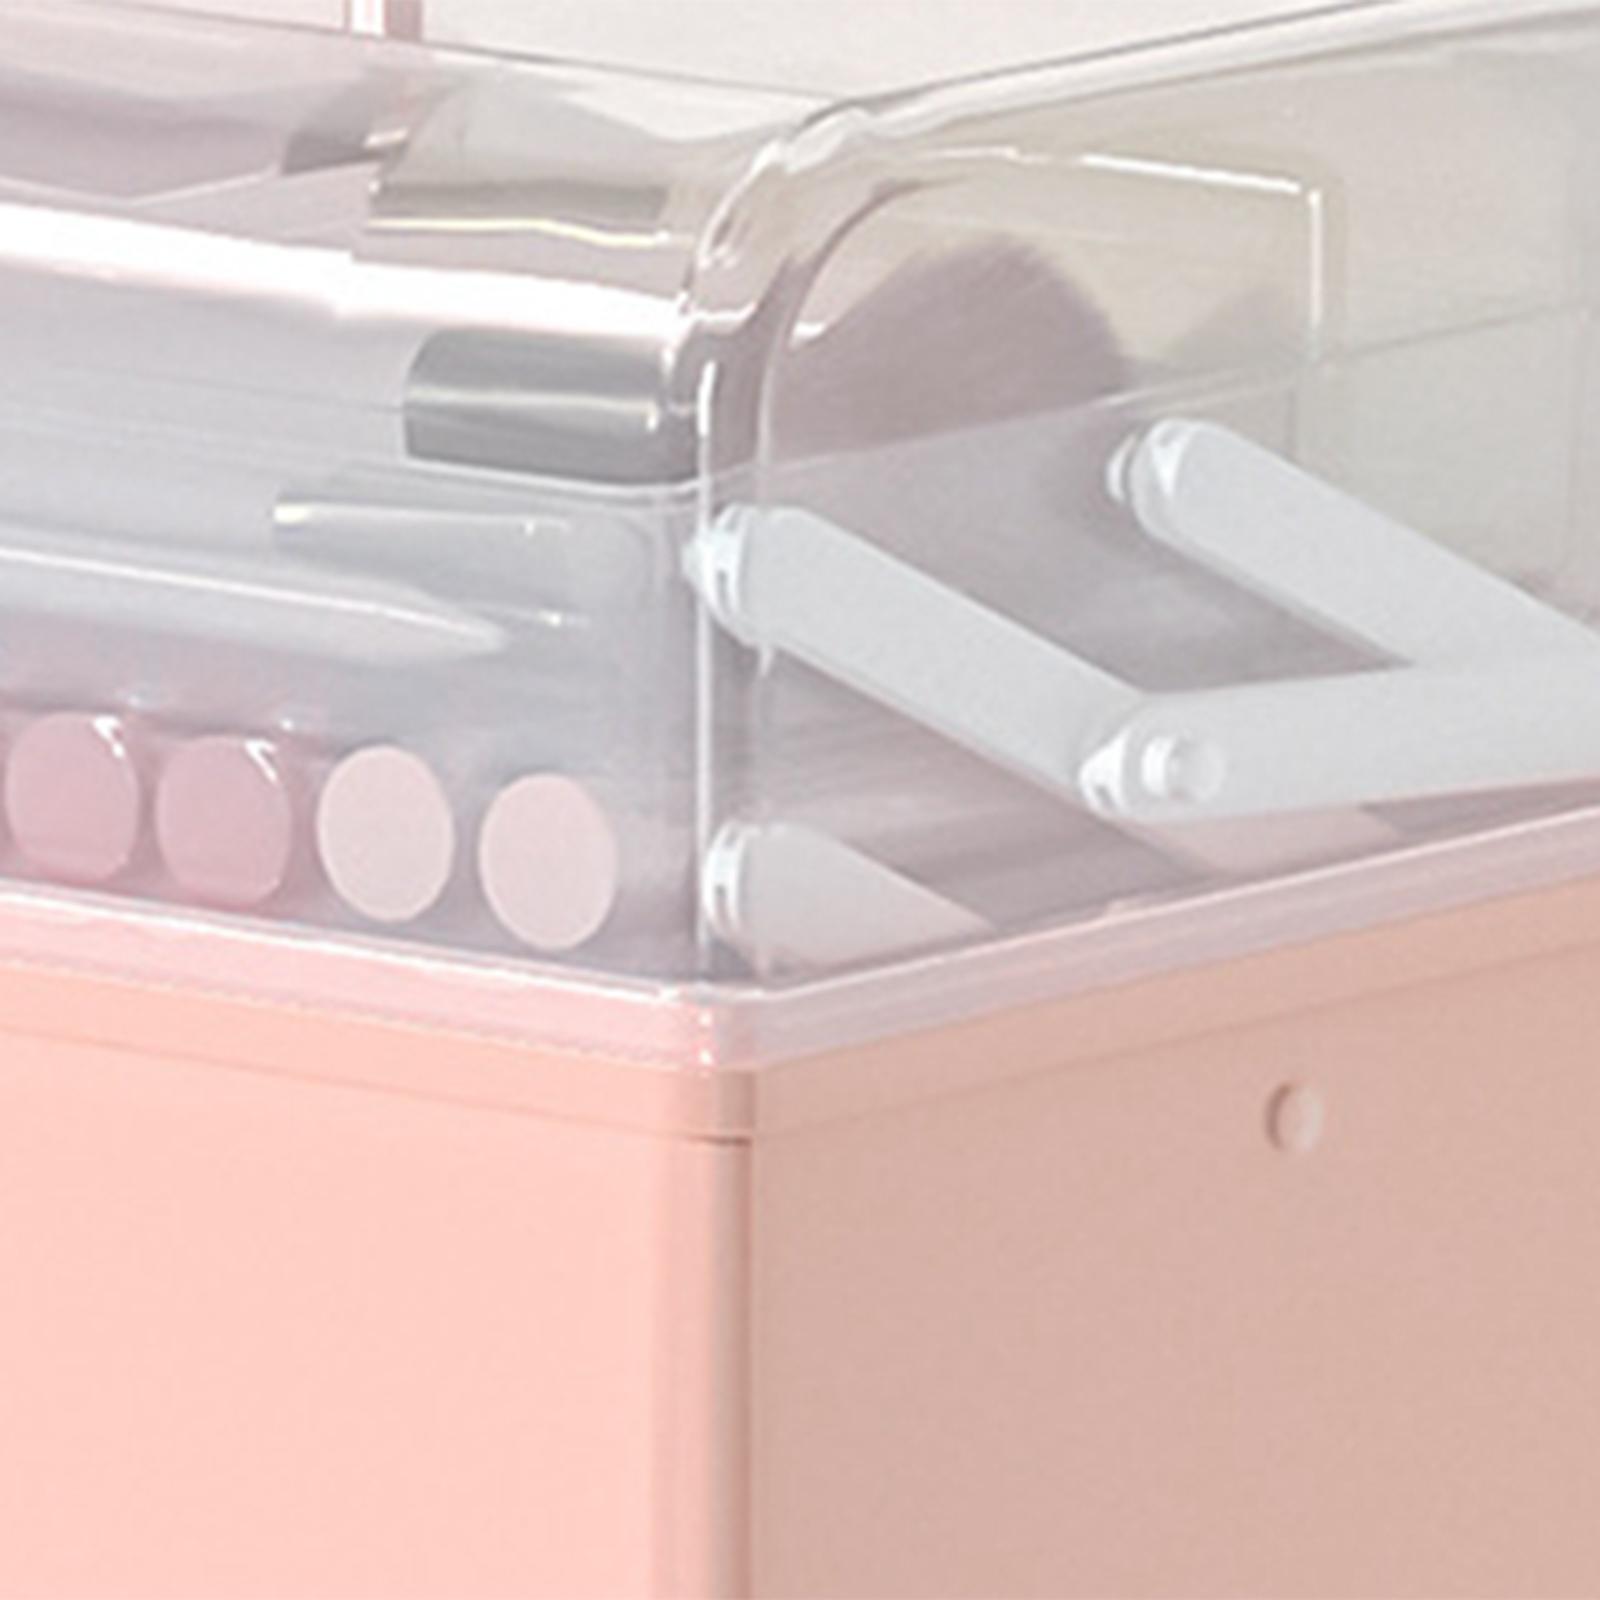 Makeup Organizer Sundries Storage Case Container for Bedroom